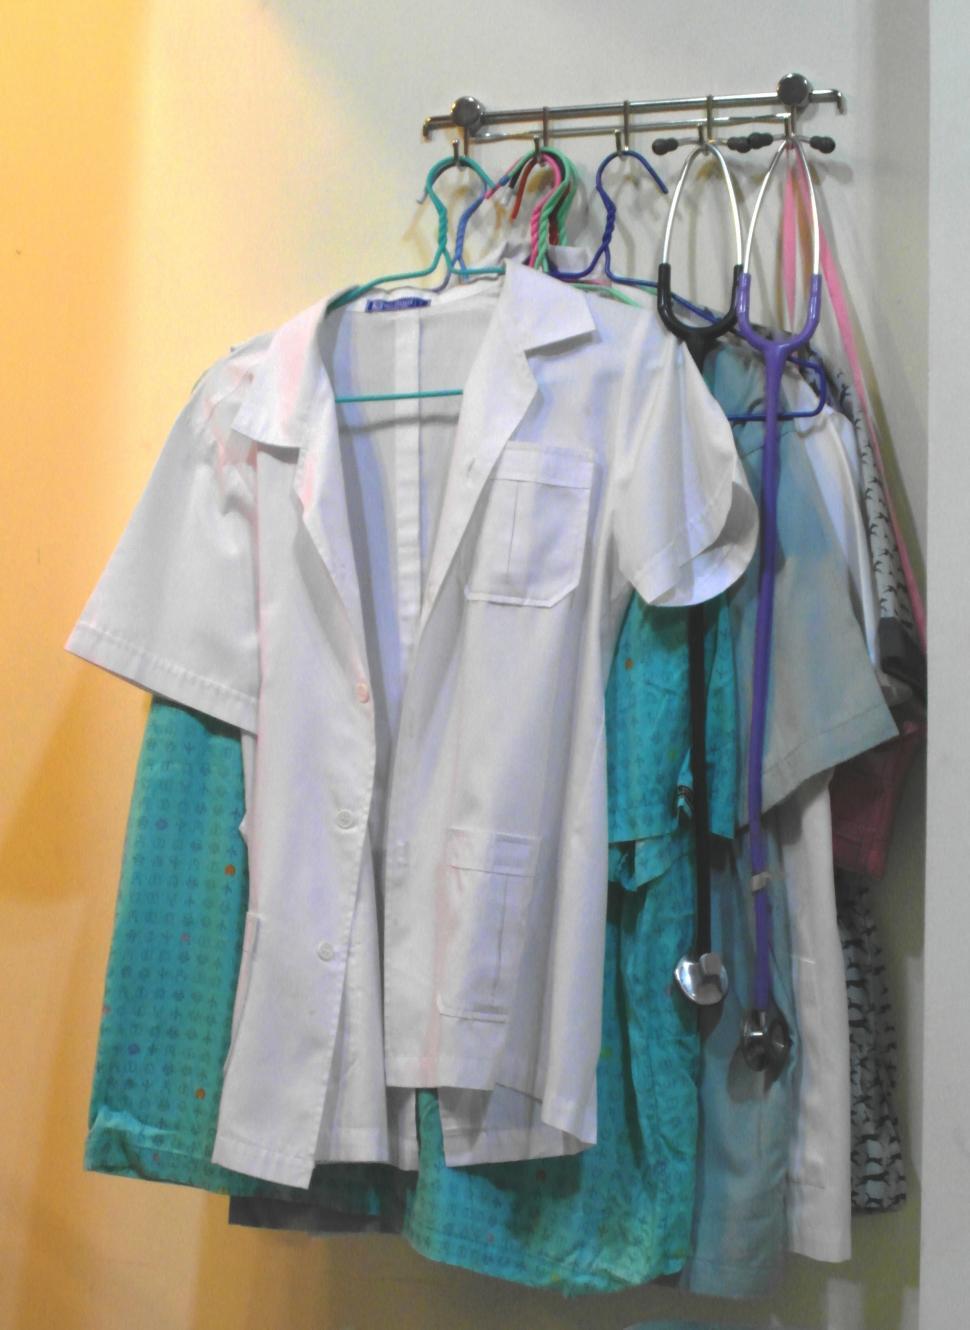 Free Image of Doctors Clothes 